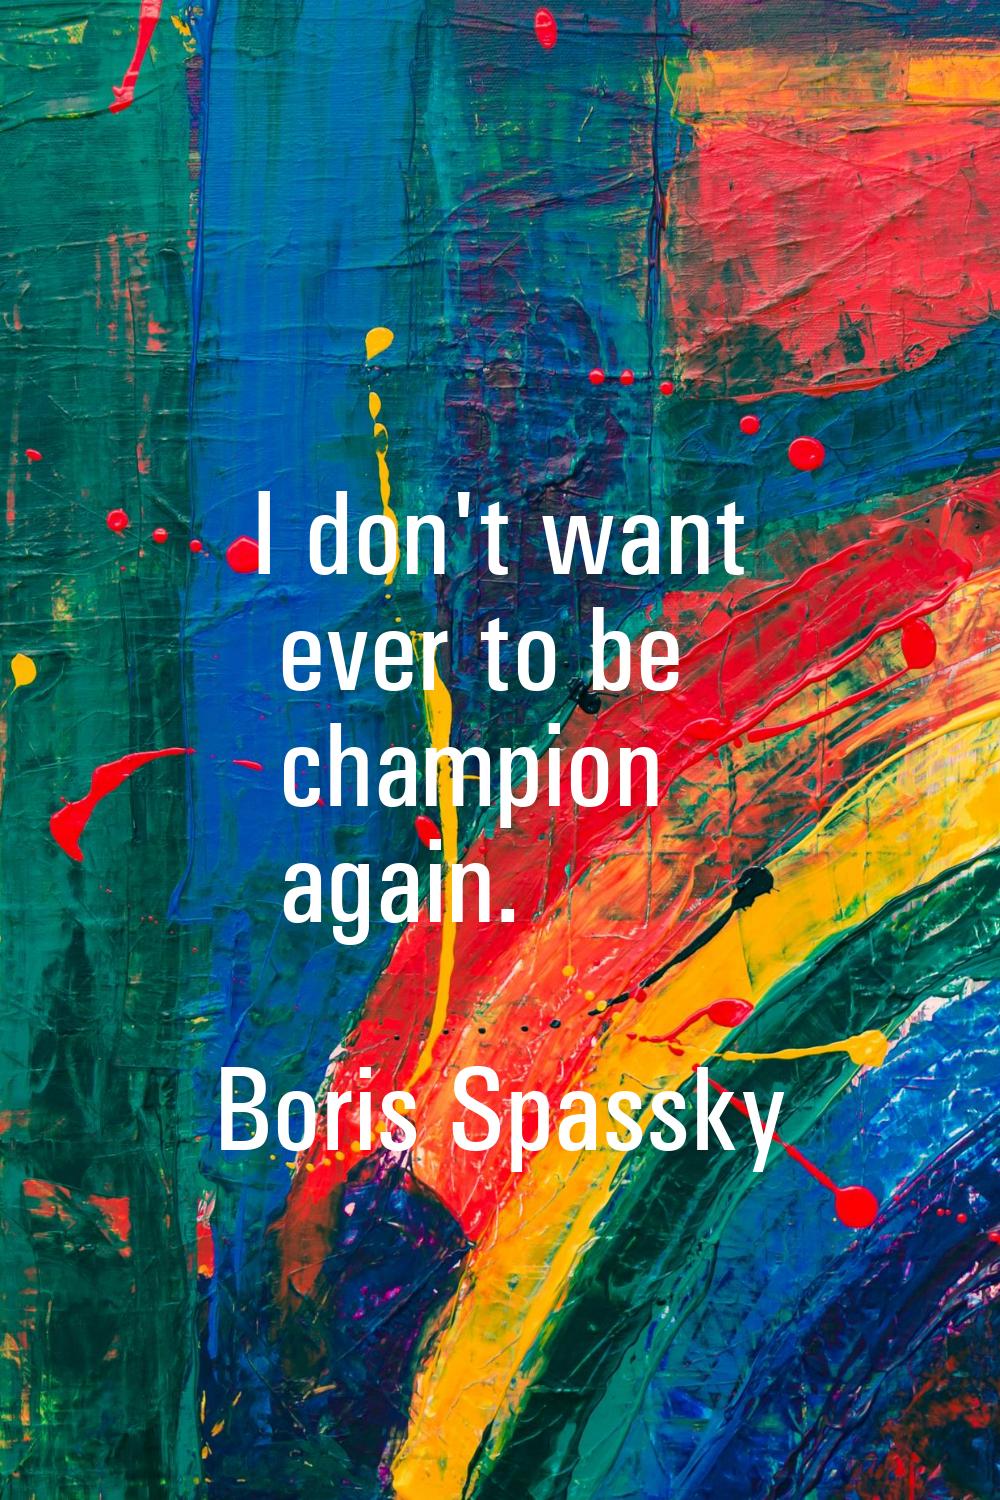 I don't want ever to be champion again.